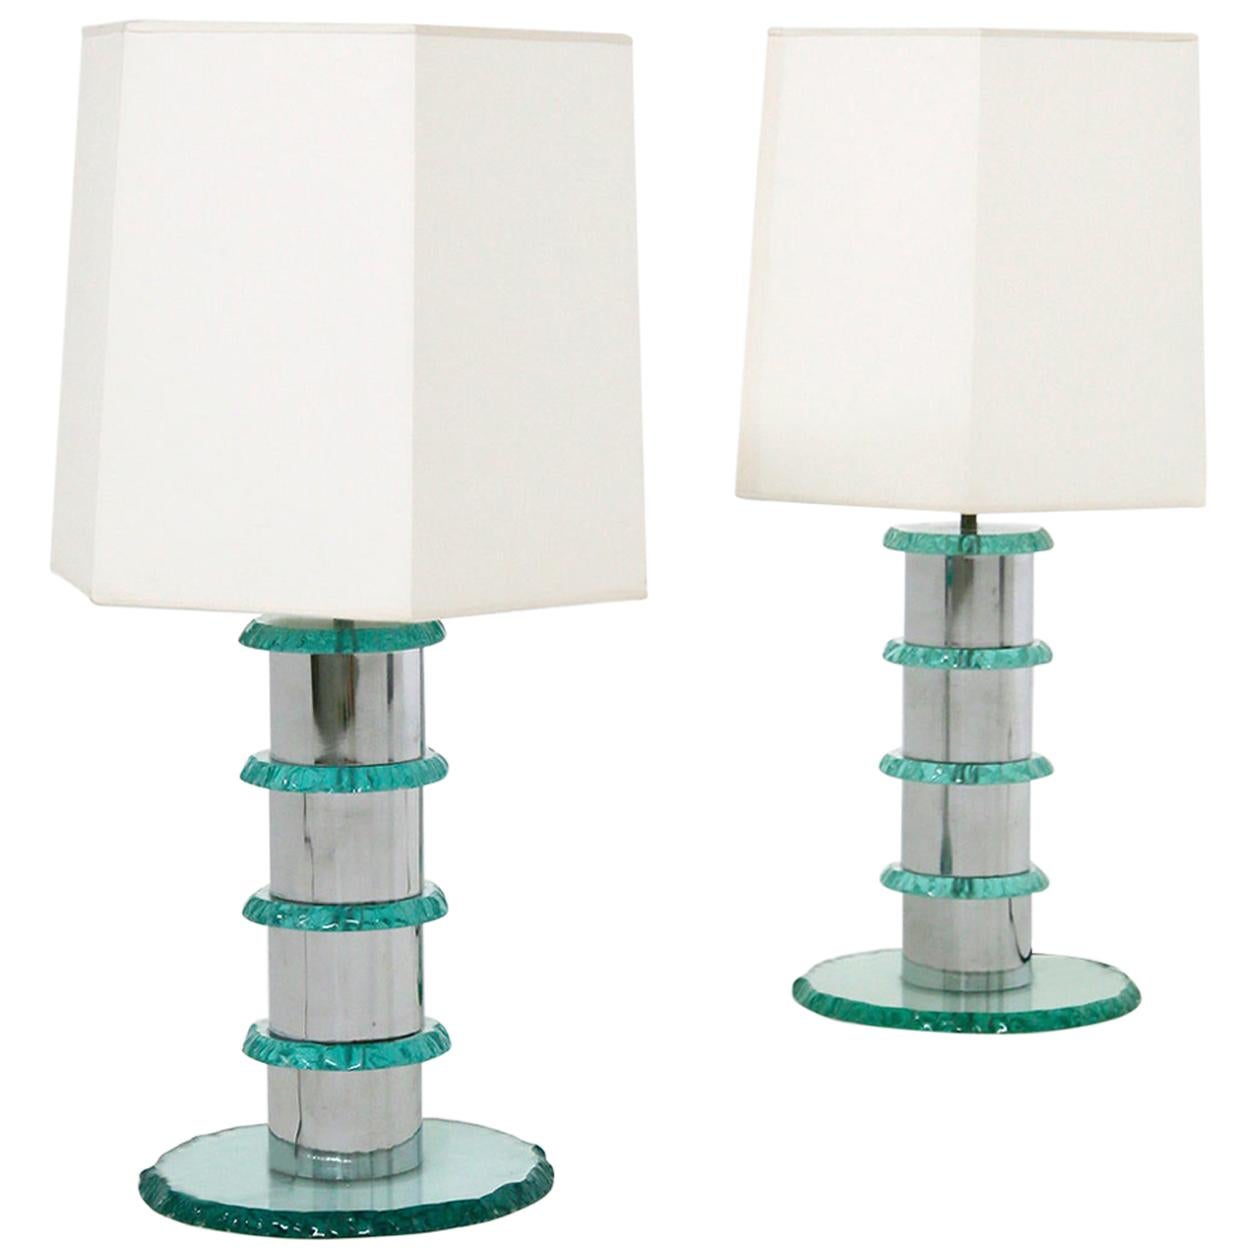 Pair of Italian Contemporary Table Lamps in Hammered Glass and Steel, 2010s